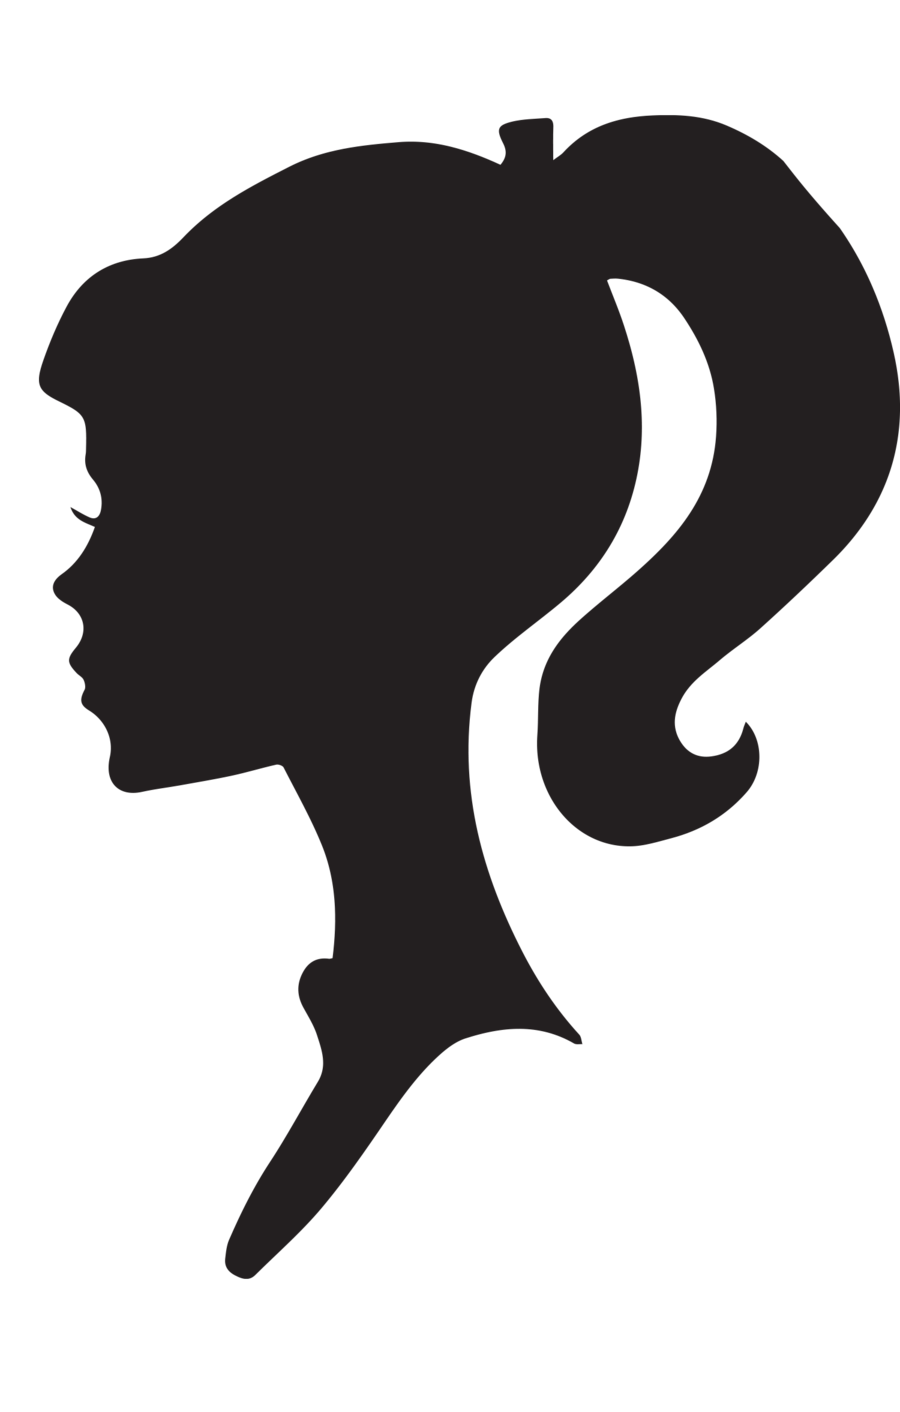 10 Woman Profile Silhouette Free Cliparts That You Can Download To You